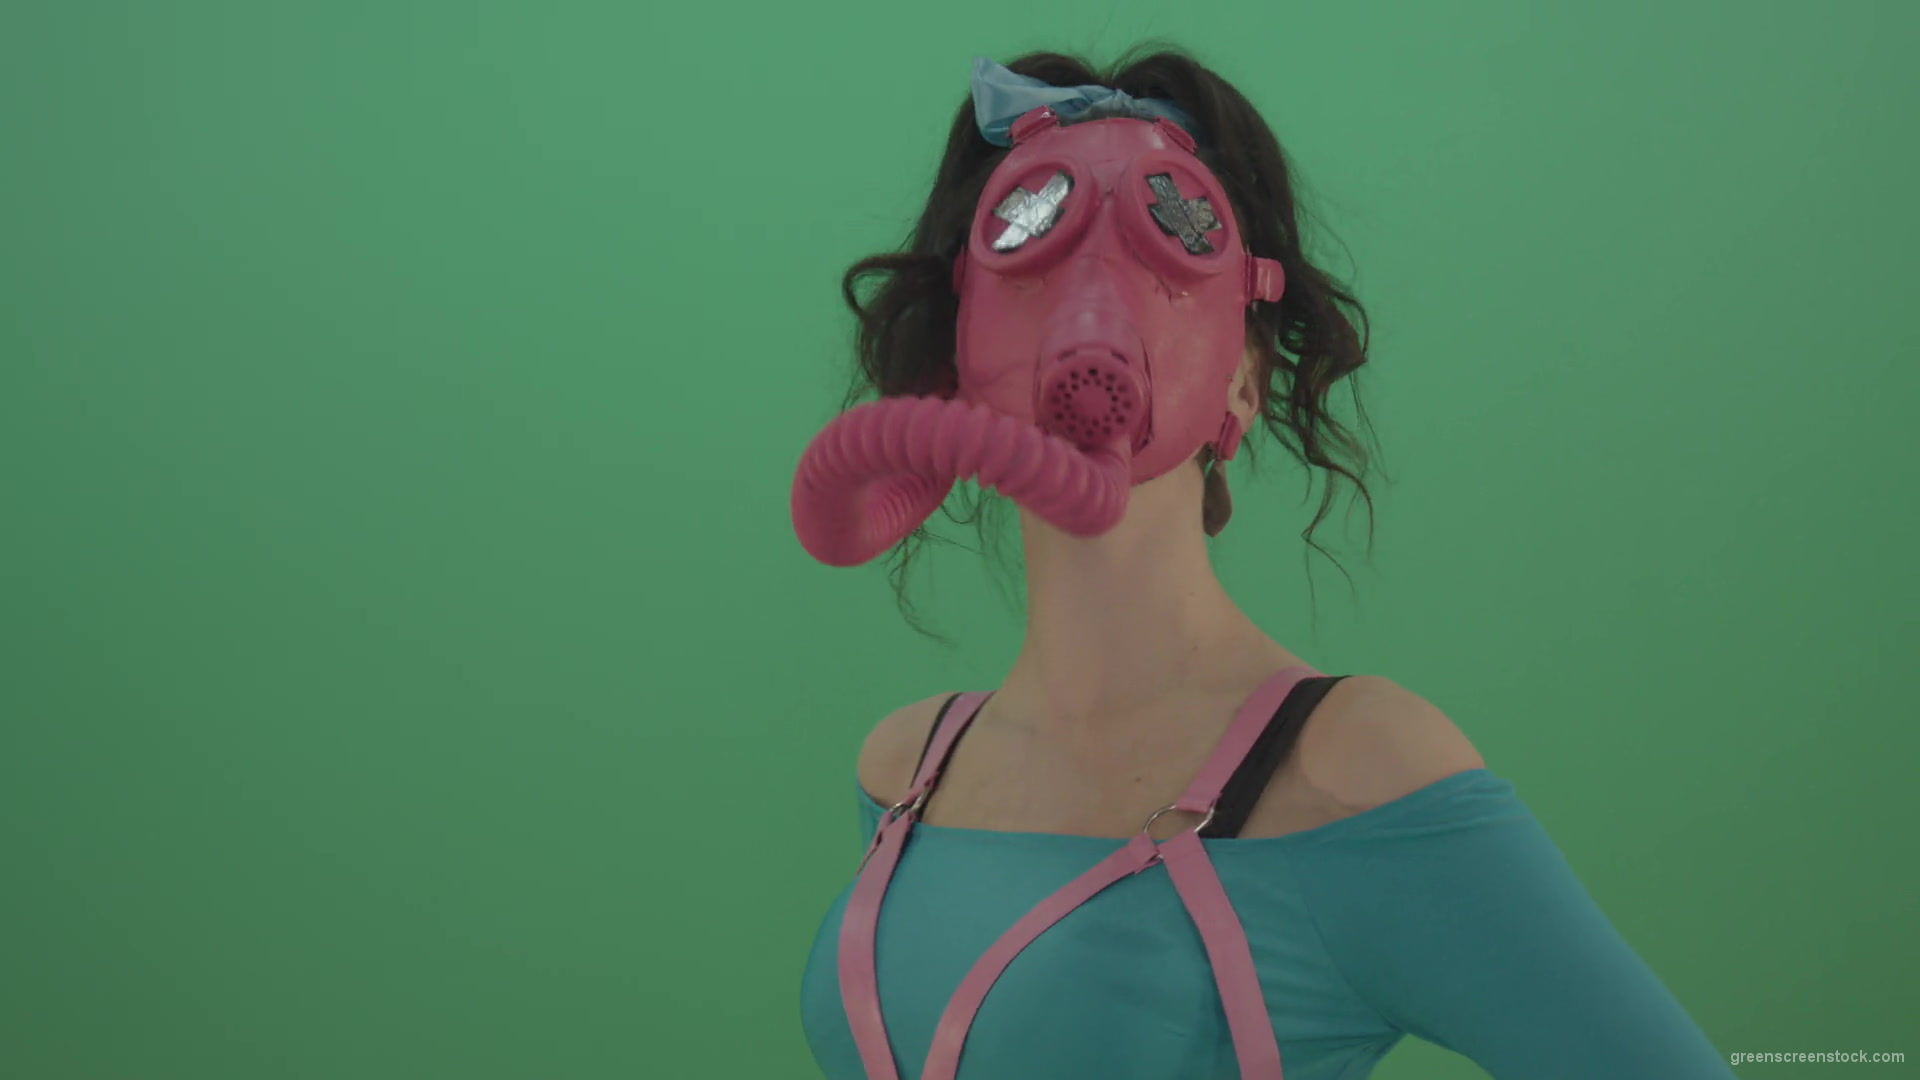 Pink-head-in-Gas-Mask-moving-Go-Go-Dance-isolated-on-green-screen-4K-Video-Footage-1920_006 Green Screen Stock